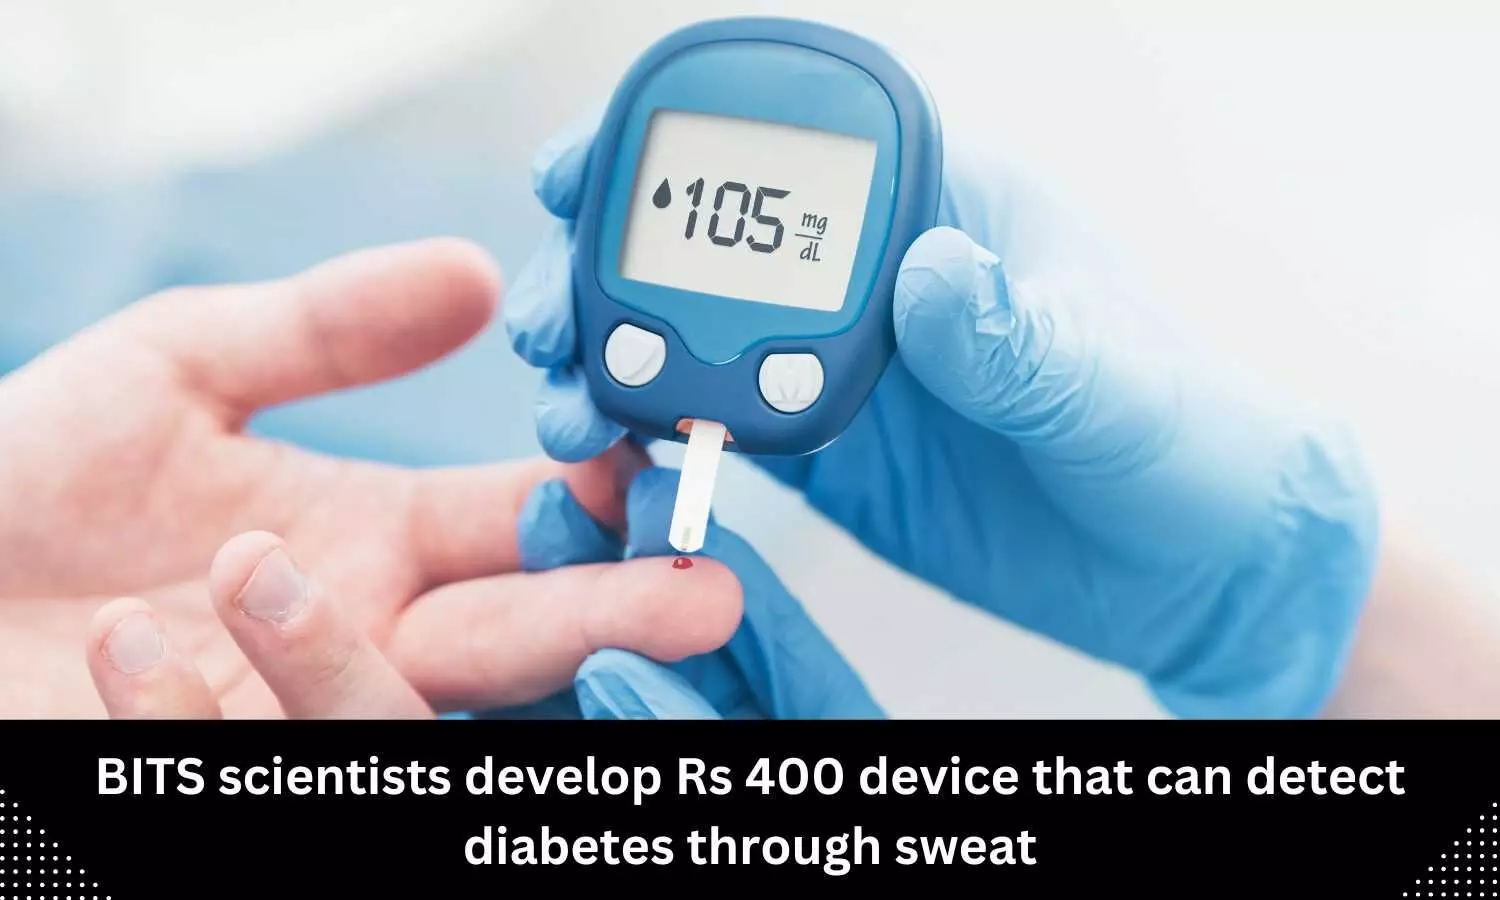 BITS scientists develop Rs 400 device that can detect diabetes through sweat